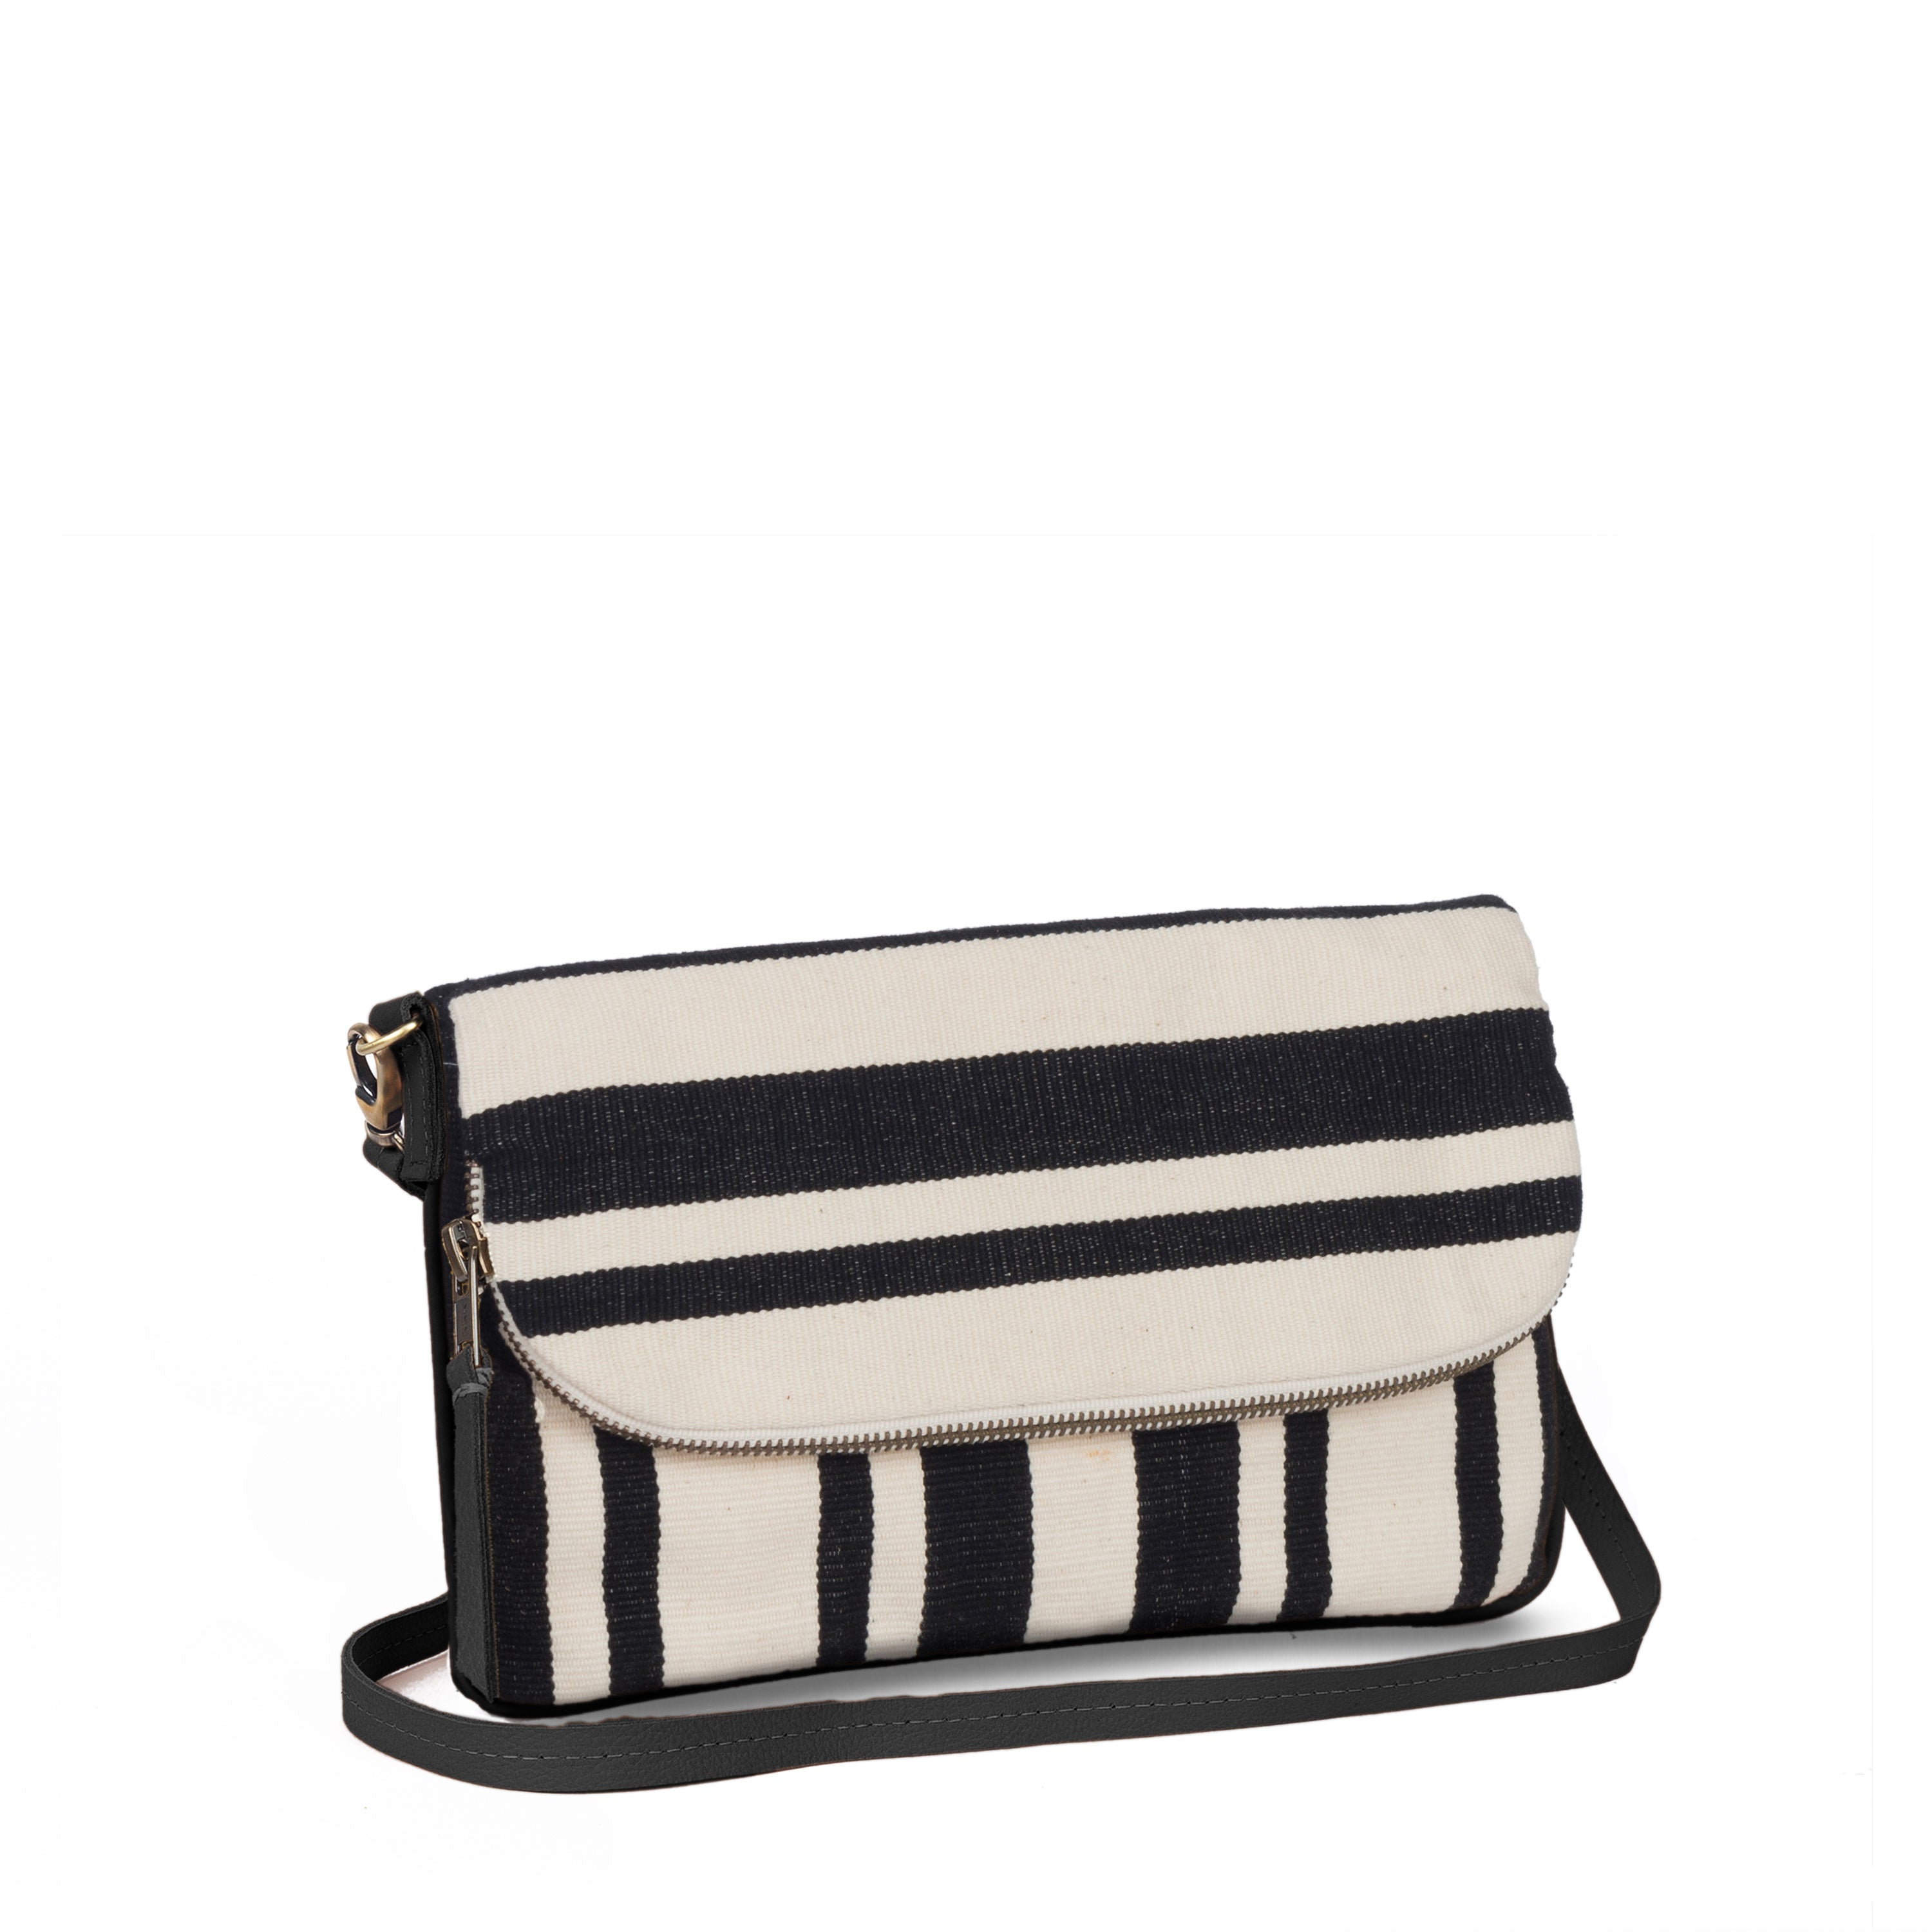 A side view of the hand woven artisan Paulina Crossbody-to-Clutch bag in Black Block Stripe. The bag has vertical and horizontal black and white stripes. It has a grey leather detachable strap.